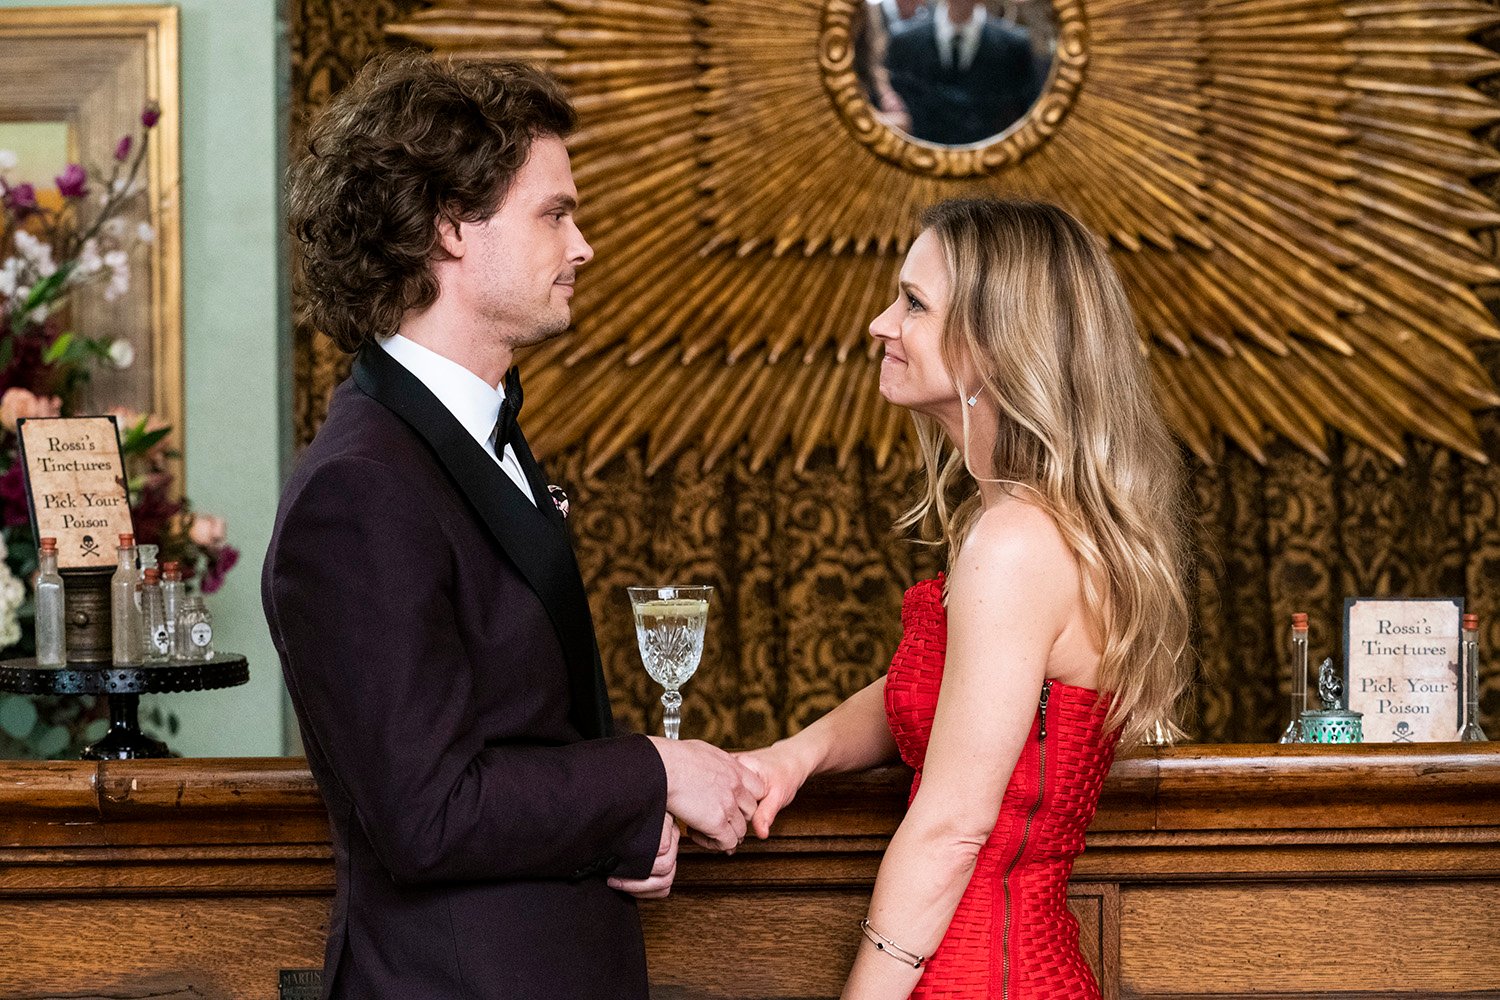 Criminal Minds stars Matthew Gray Gubler as Spencer Reid and A.J. Cook as JJ facing each other beside a bar and smiling while wearing a tuxedo and a red dress